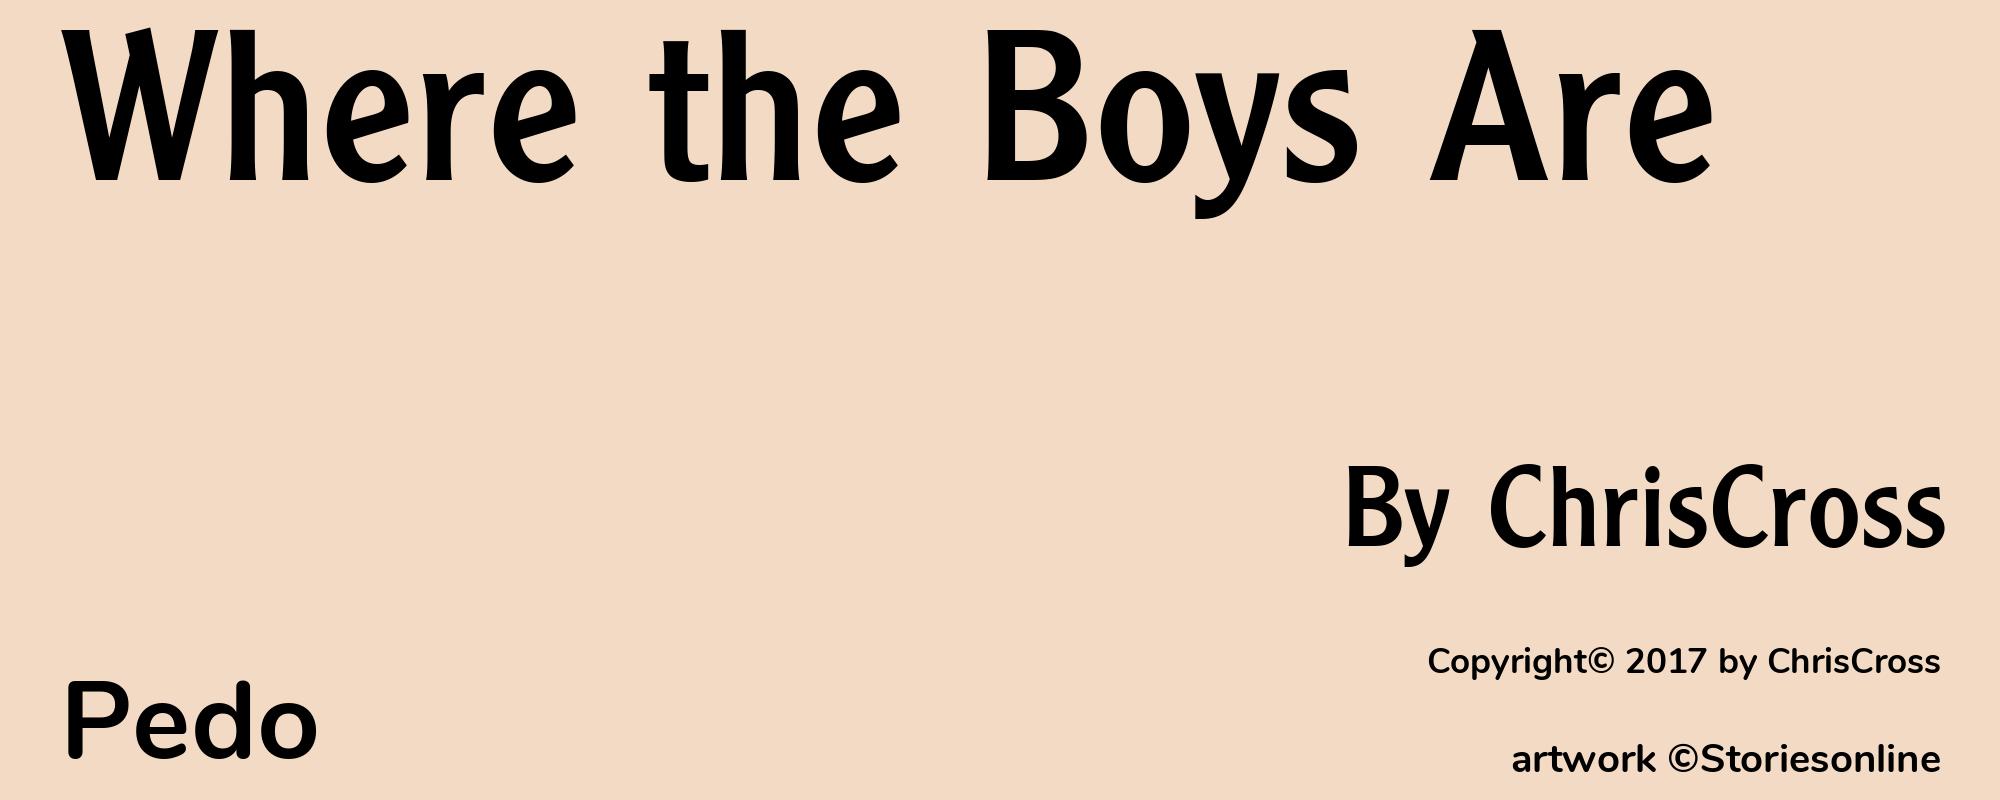 Where the Boys Are - Cover